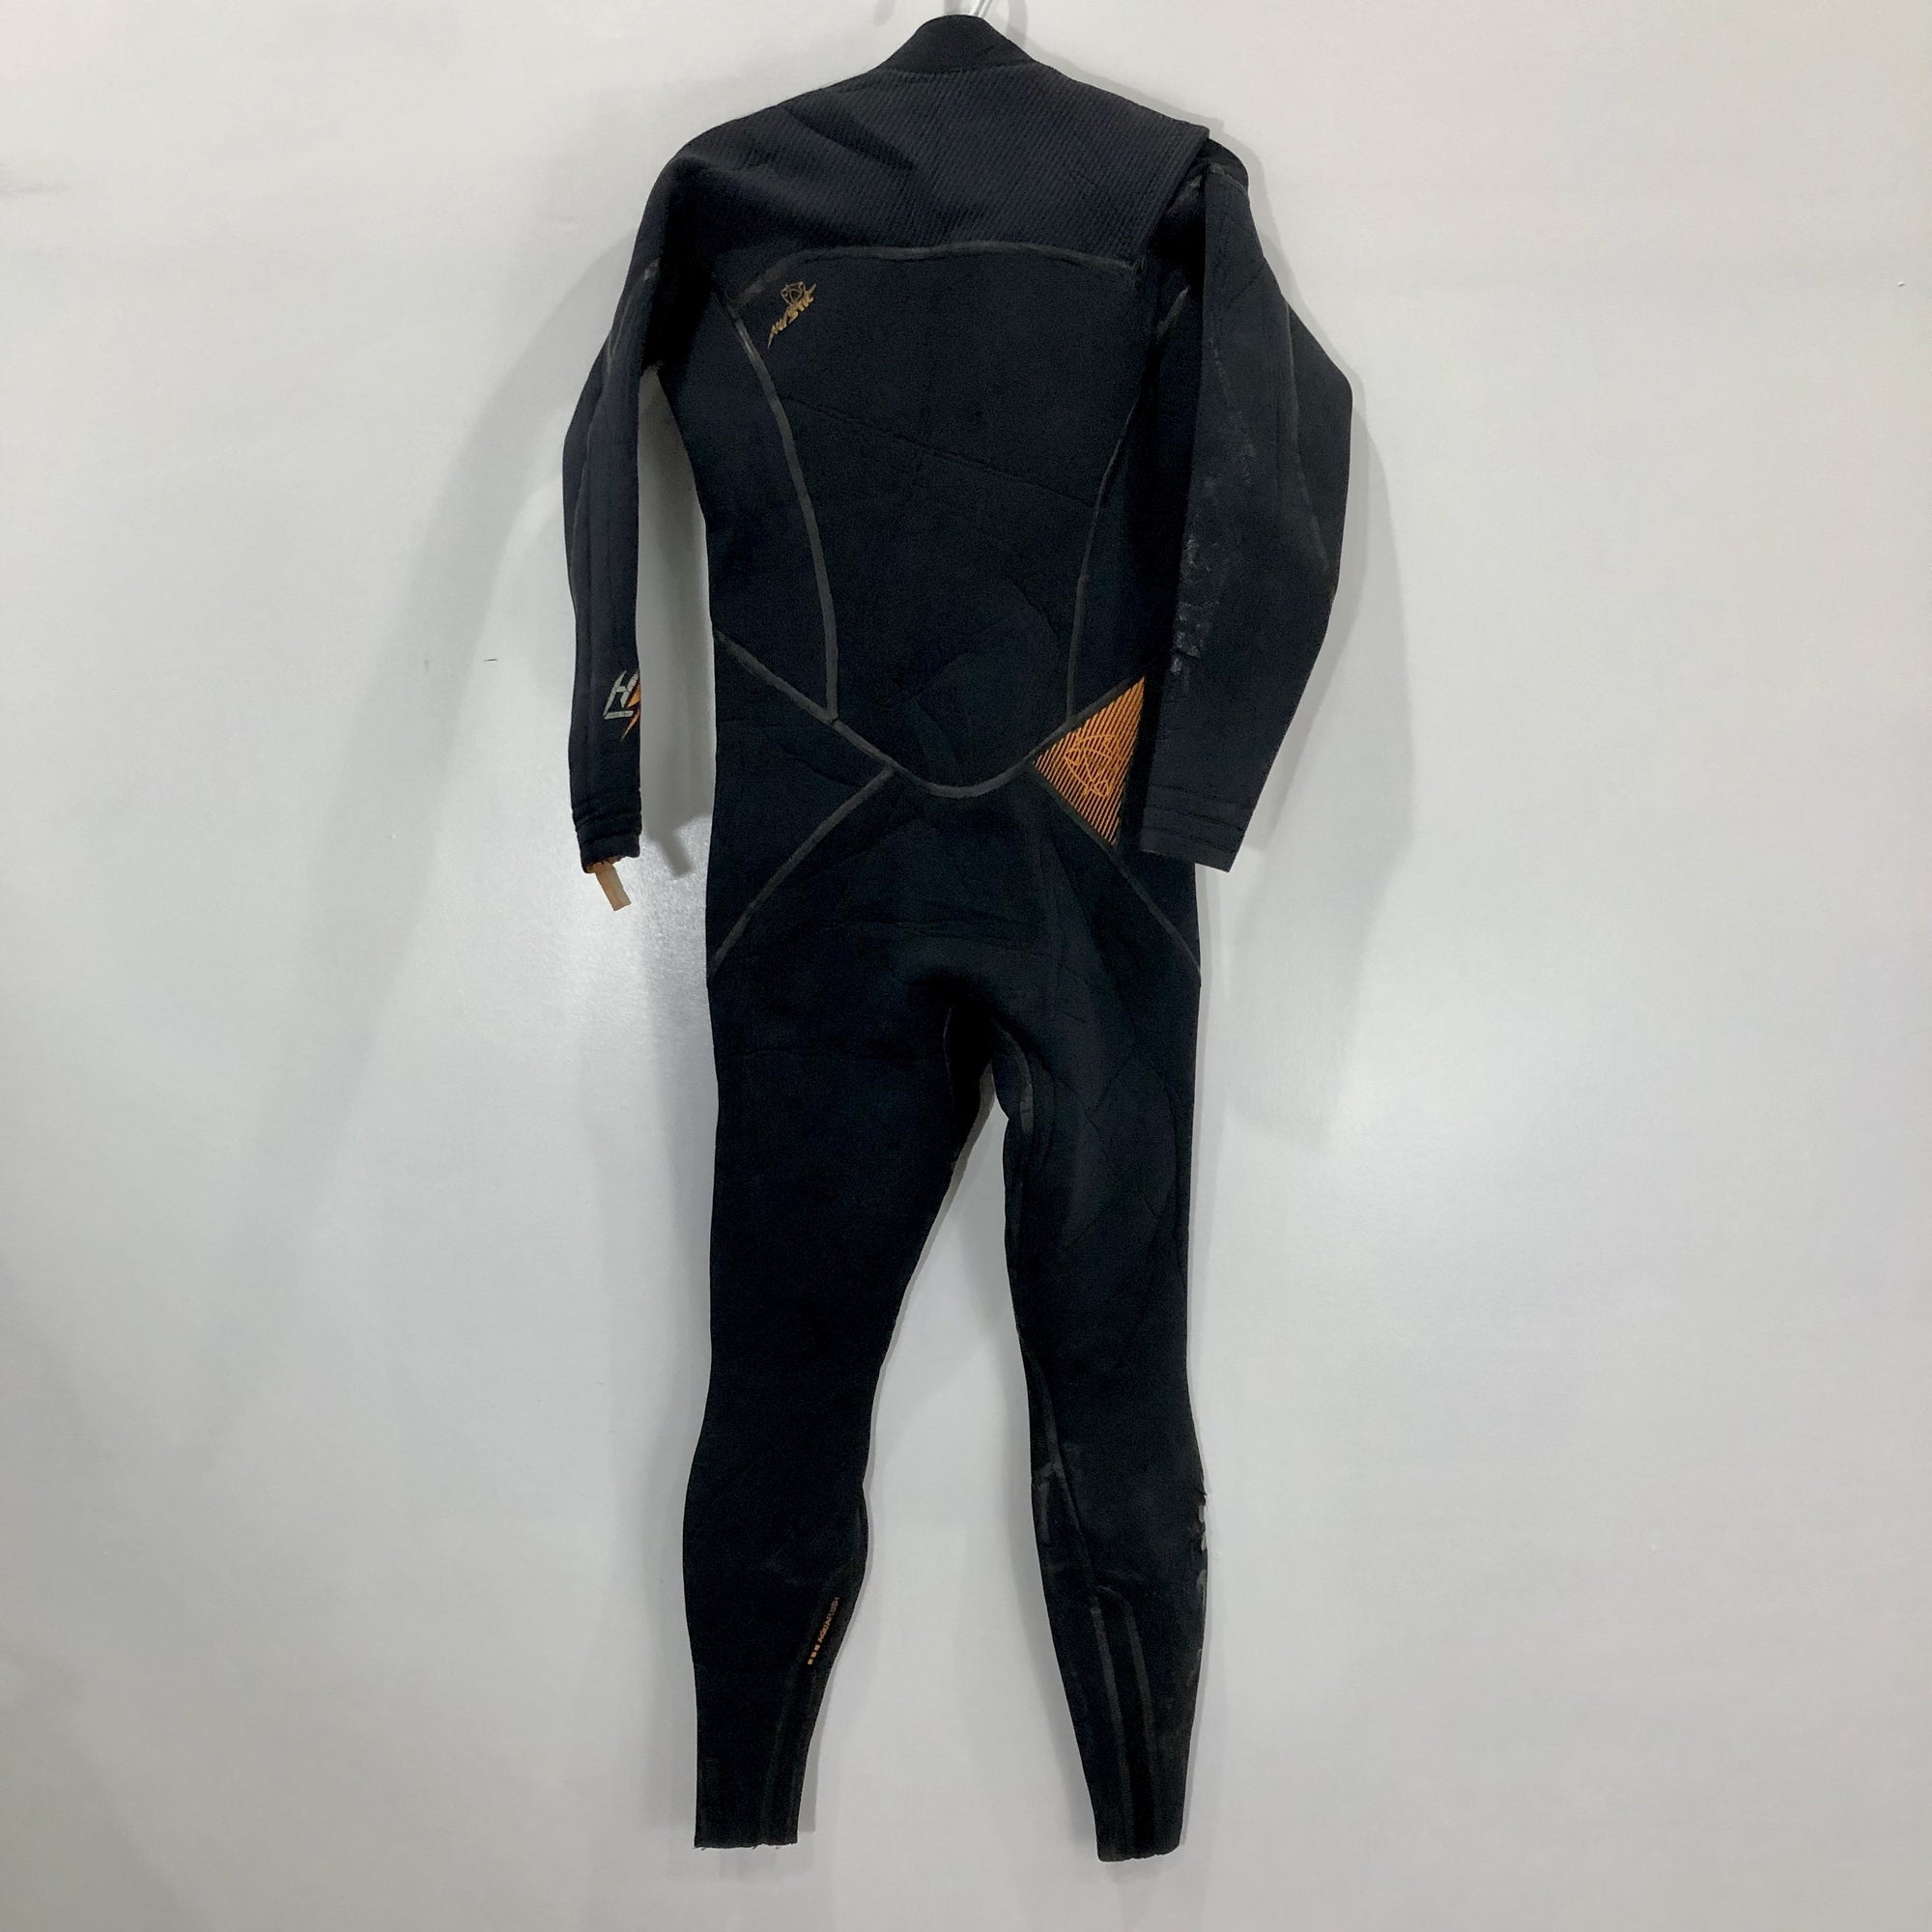 USED Mystic Wetsuit High Voltage Full Suit M front